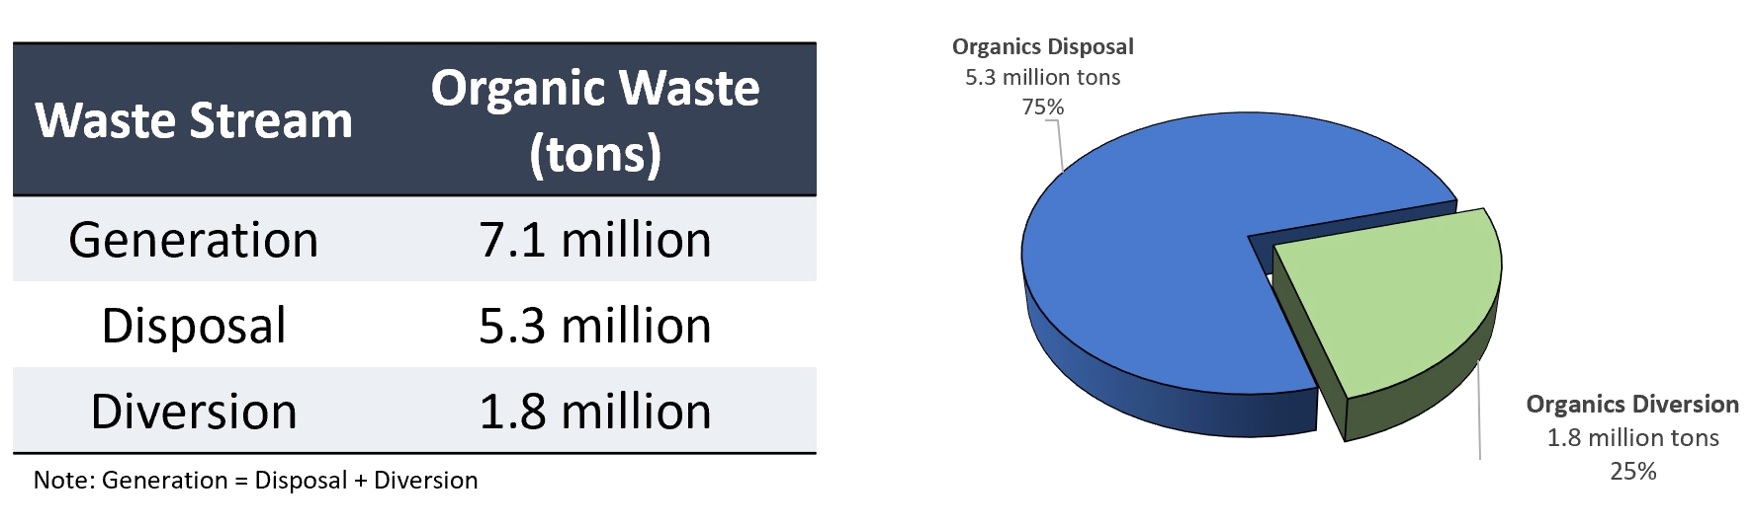 organic waste Is disposed by residents & business in LA County